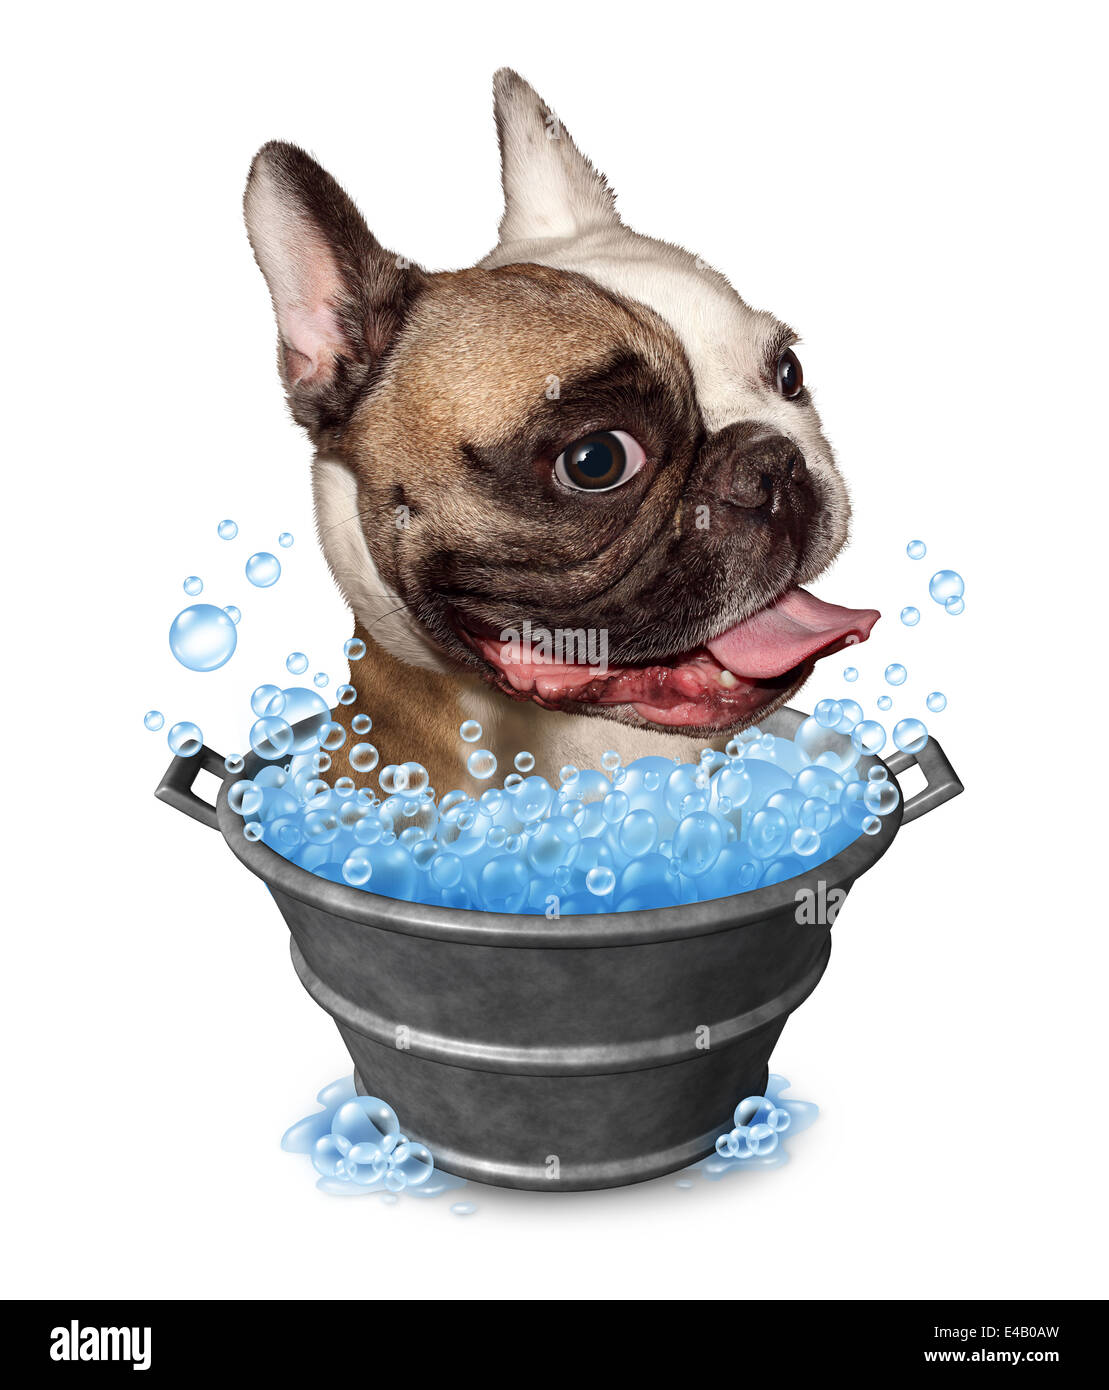 Dog bath funny concept as a happy bulldog in a metal bucket tub with soap bubbles on a white background as a pet grooming symbol and animal cleaning icon. Stock Photo